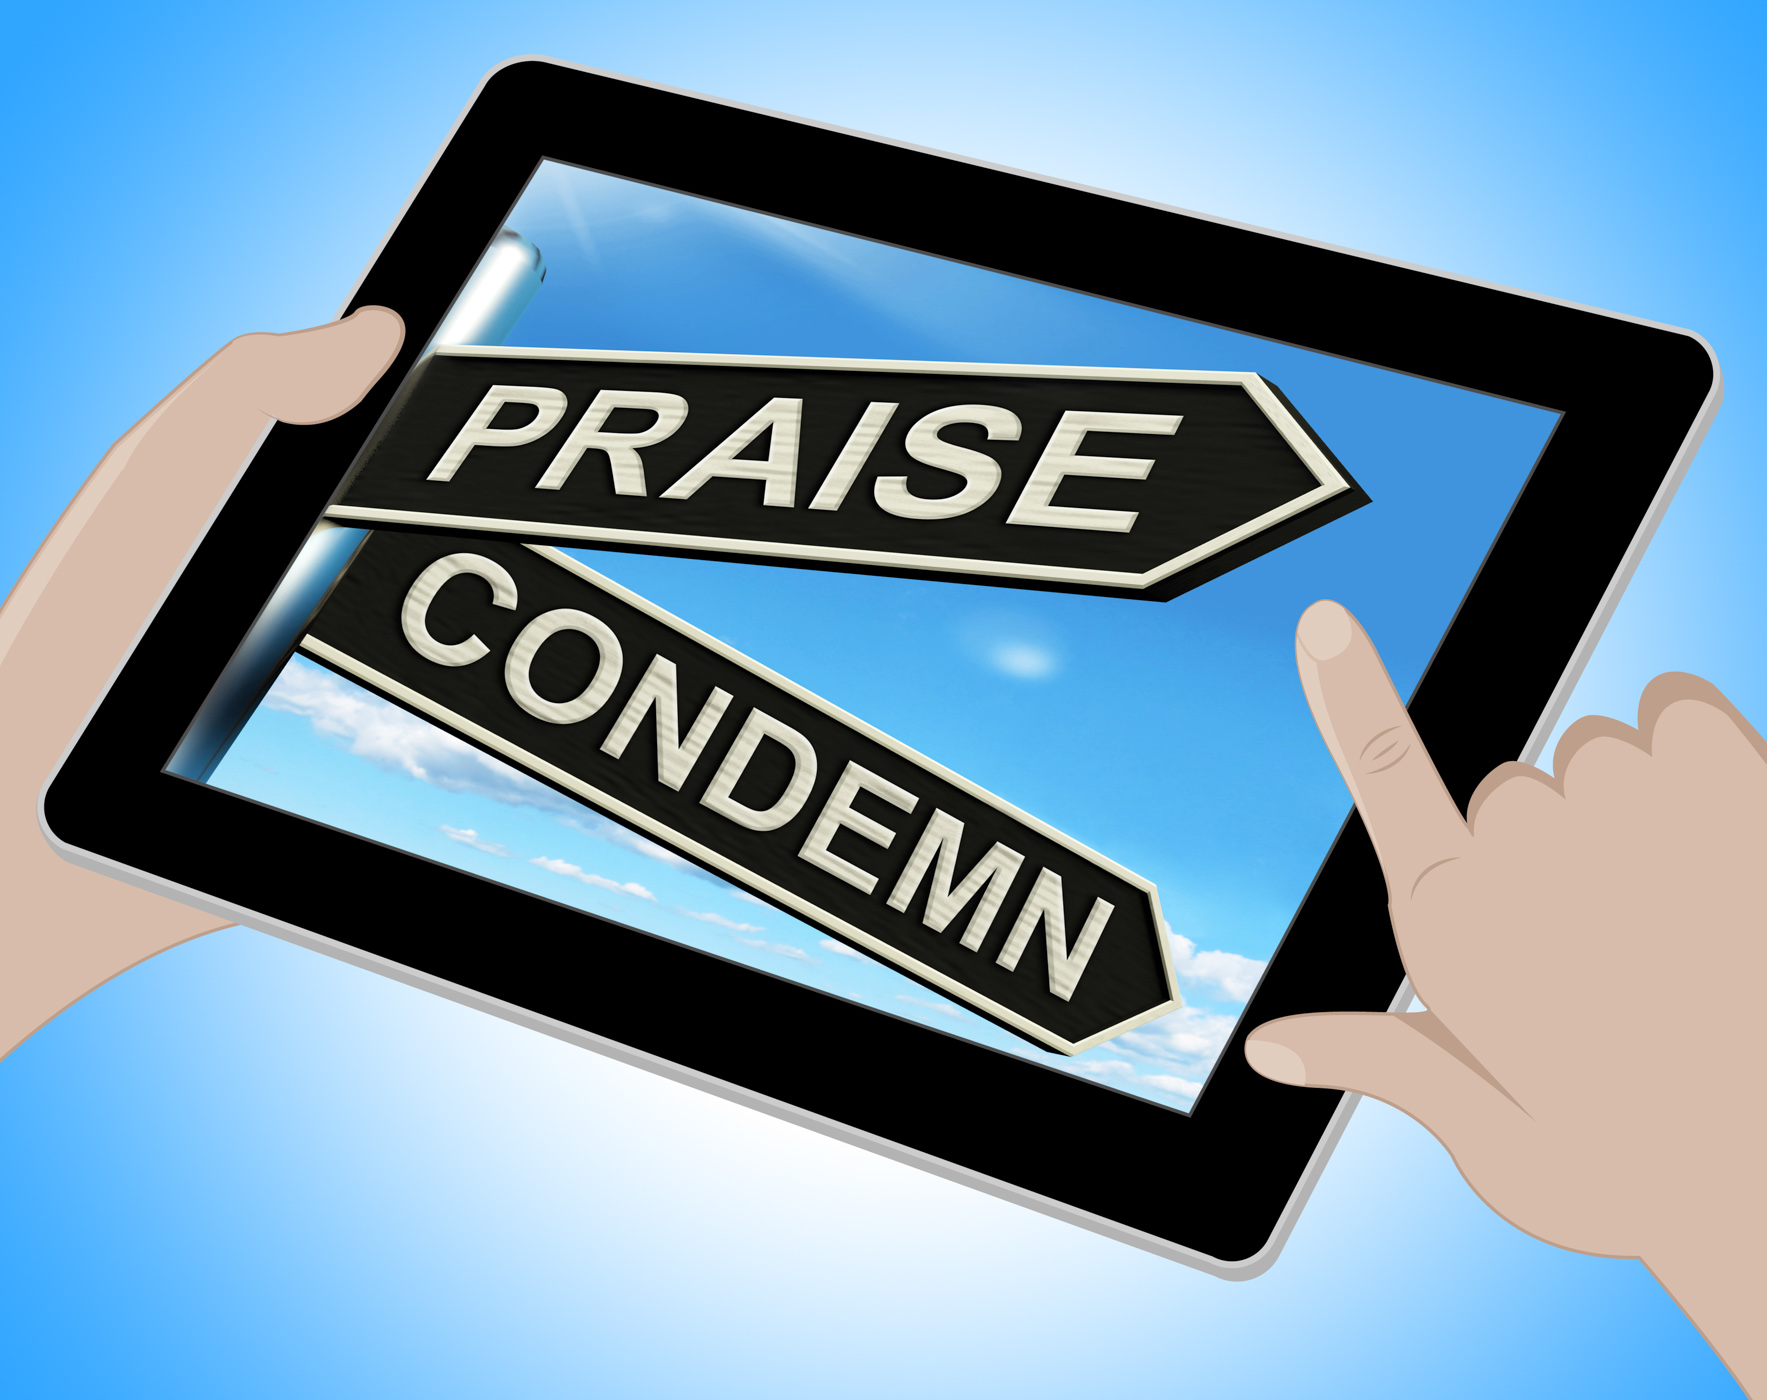 Praise condemn tablet shows approval or disapproval photo